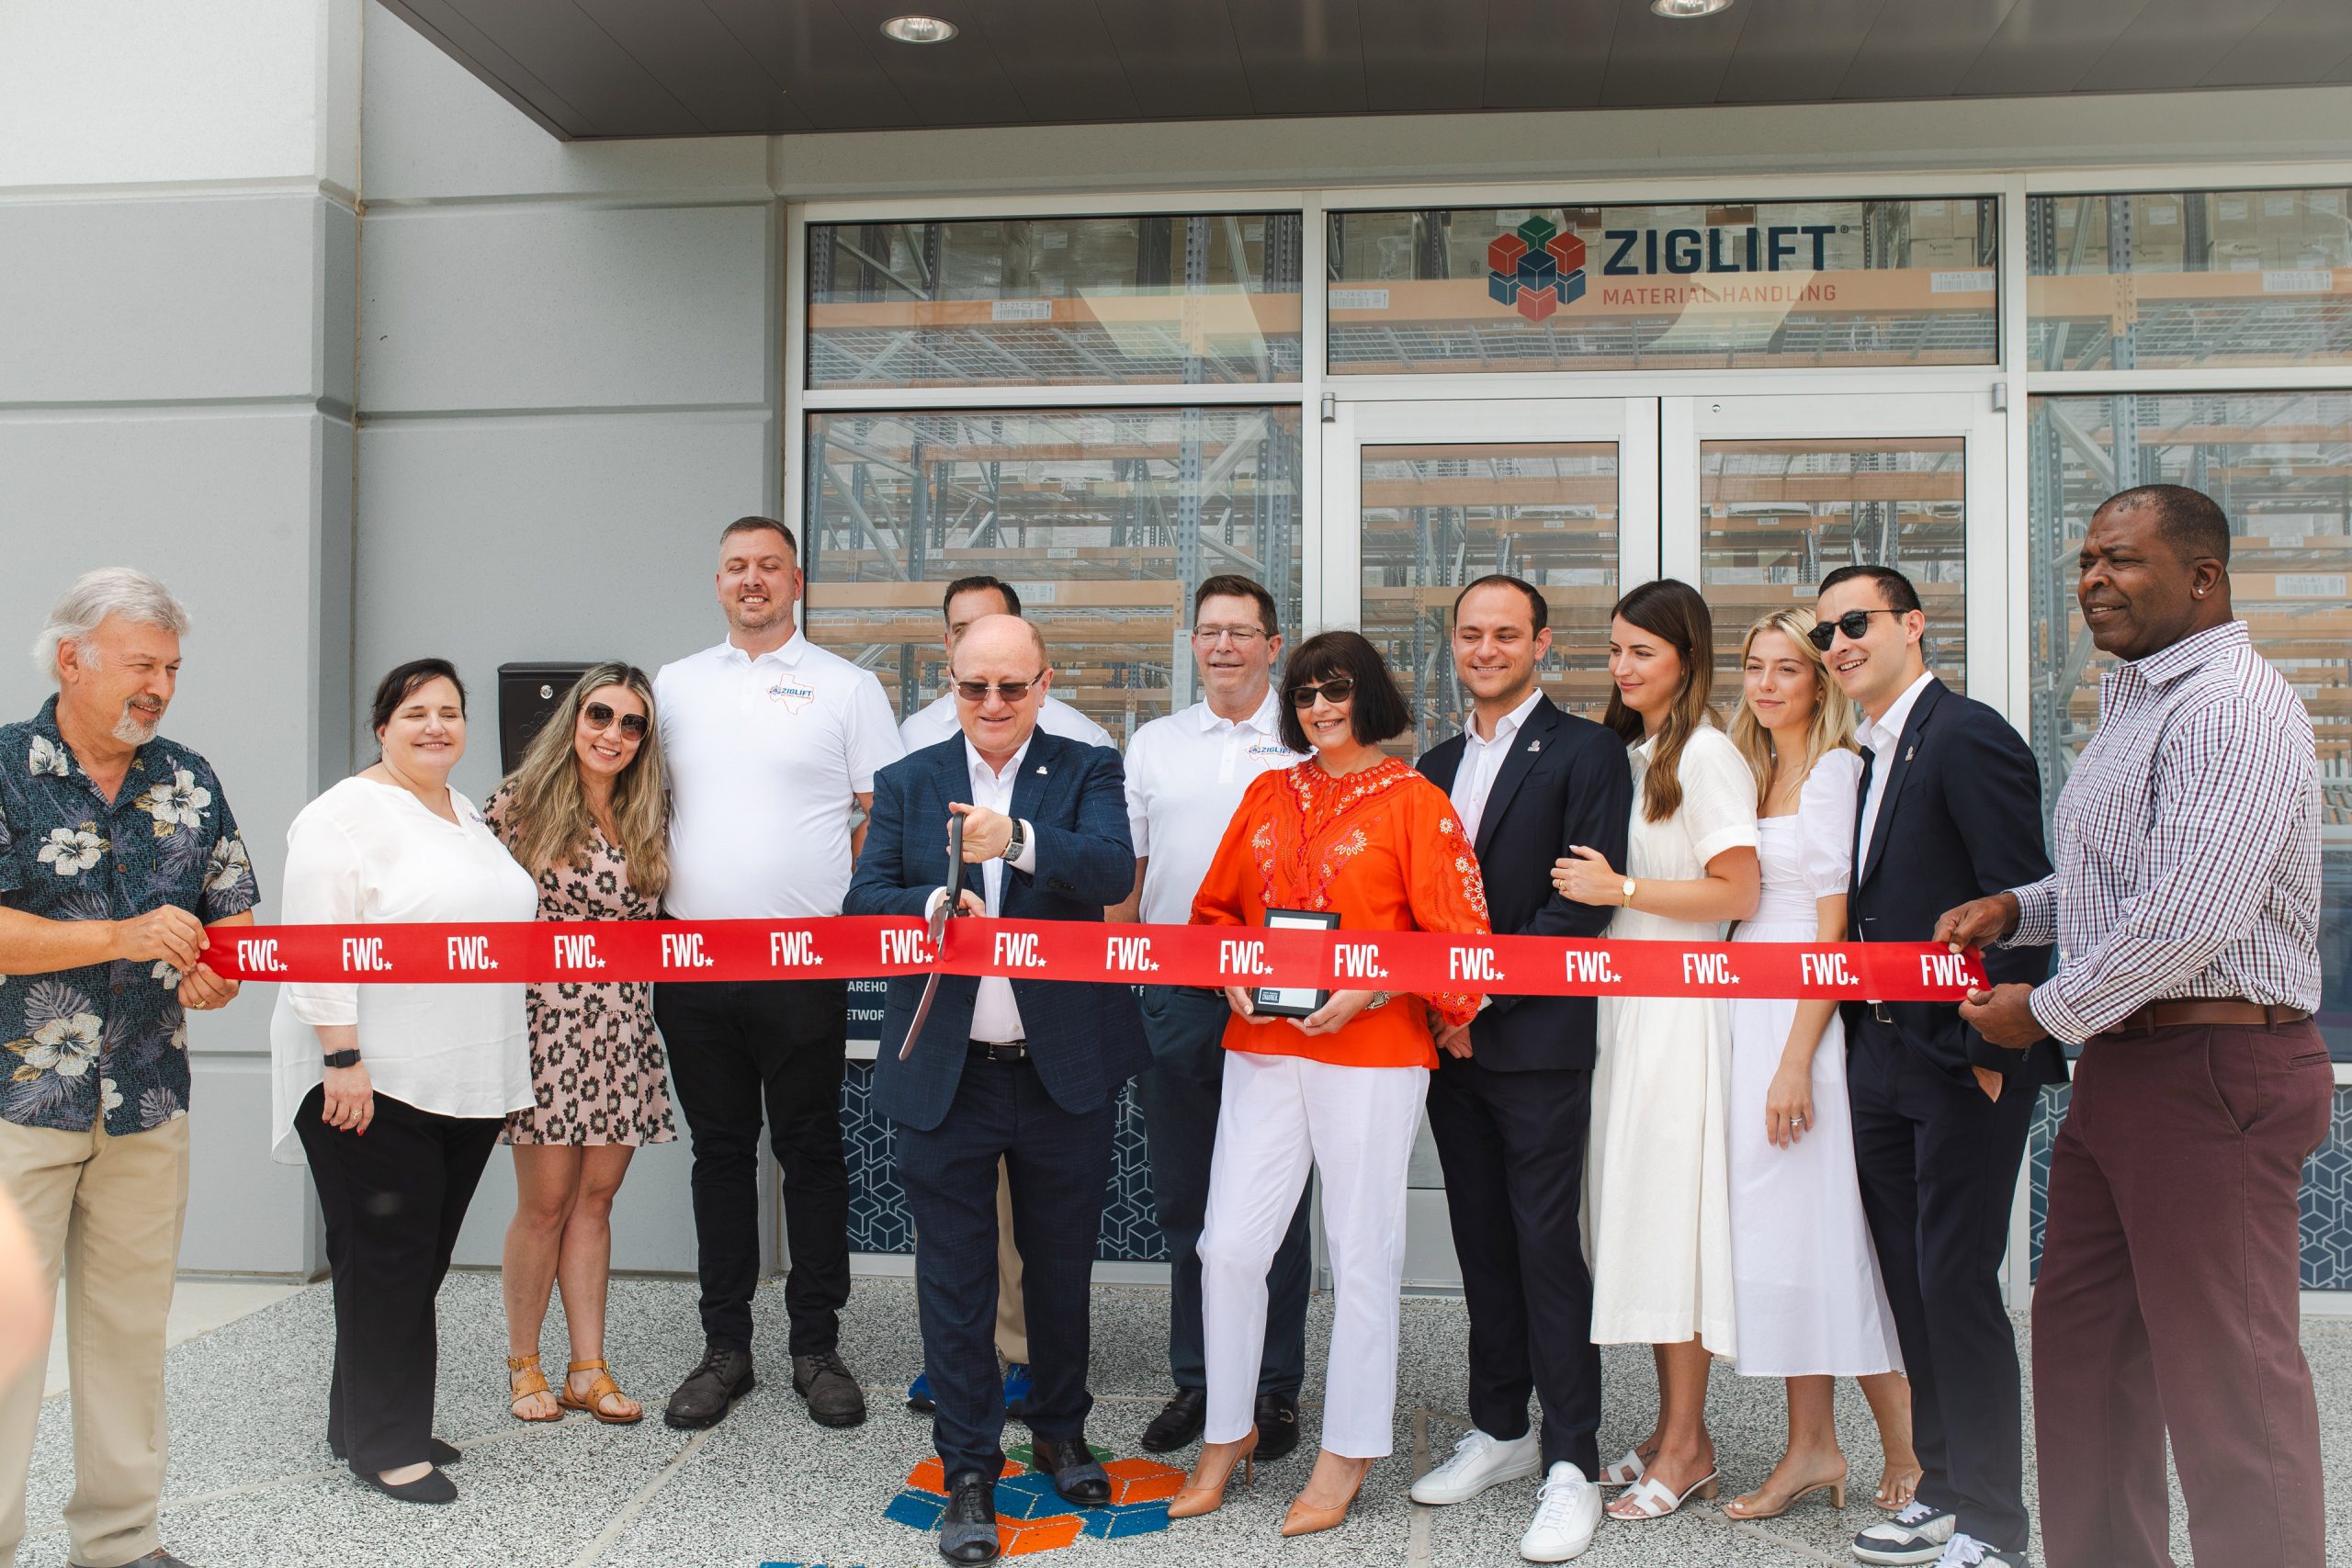 Ziglift Material Handling Celebrates Grand Opening of Fort Worth, TX Office